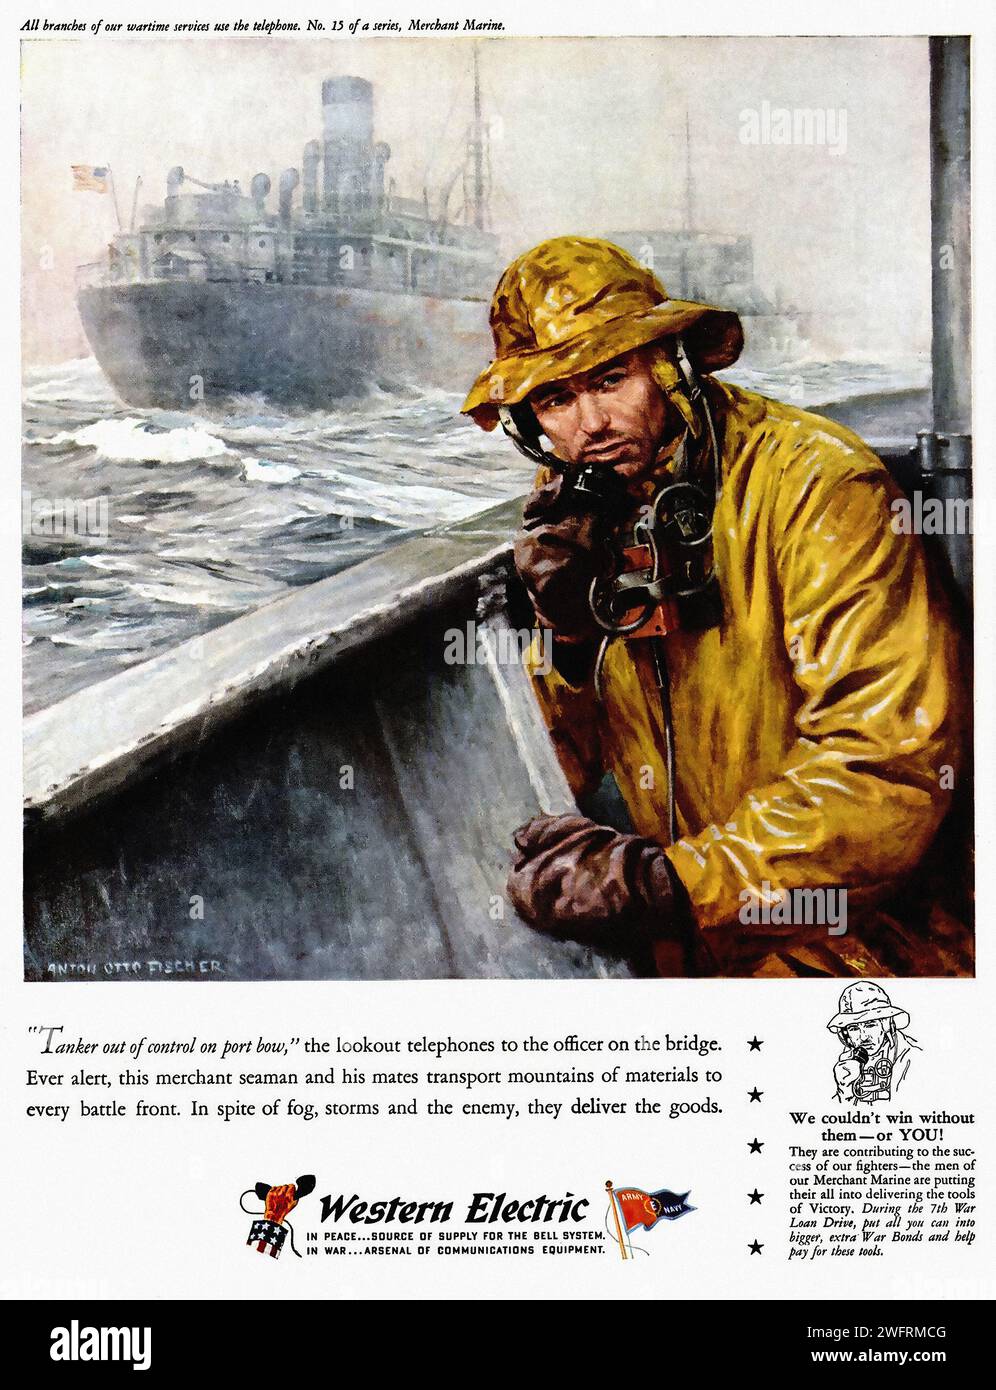 “TIMBER OR COTTON OR IRON BARS”, “THE LOOKOUT TELEPHONES TO THE OFFICER ON THE BRIDGE”, “WESTERN ELECTRIC - THE RIGHT WAY TO TELEPHONE”  This is a vintage American advertisement from the World War II era for Western Electric. The image is a vivid painting of a man in a yellow raincoat and hat, standing on the deck of a ship. The man is holding a telephone receiver to his ear, embodying the critical role of communication in maritime operations. In the background, a large ship looms in the fog, adding an element of mystery and adventure to the scene. The text on the image emphasizes the importan Stock Photo